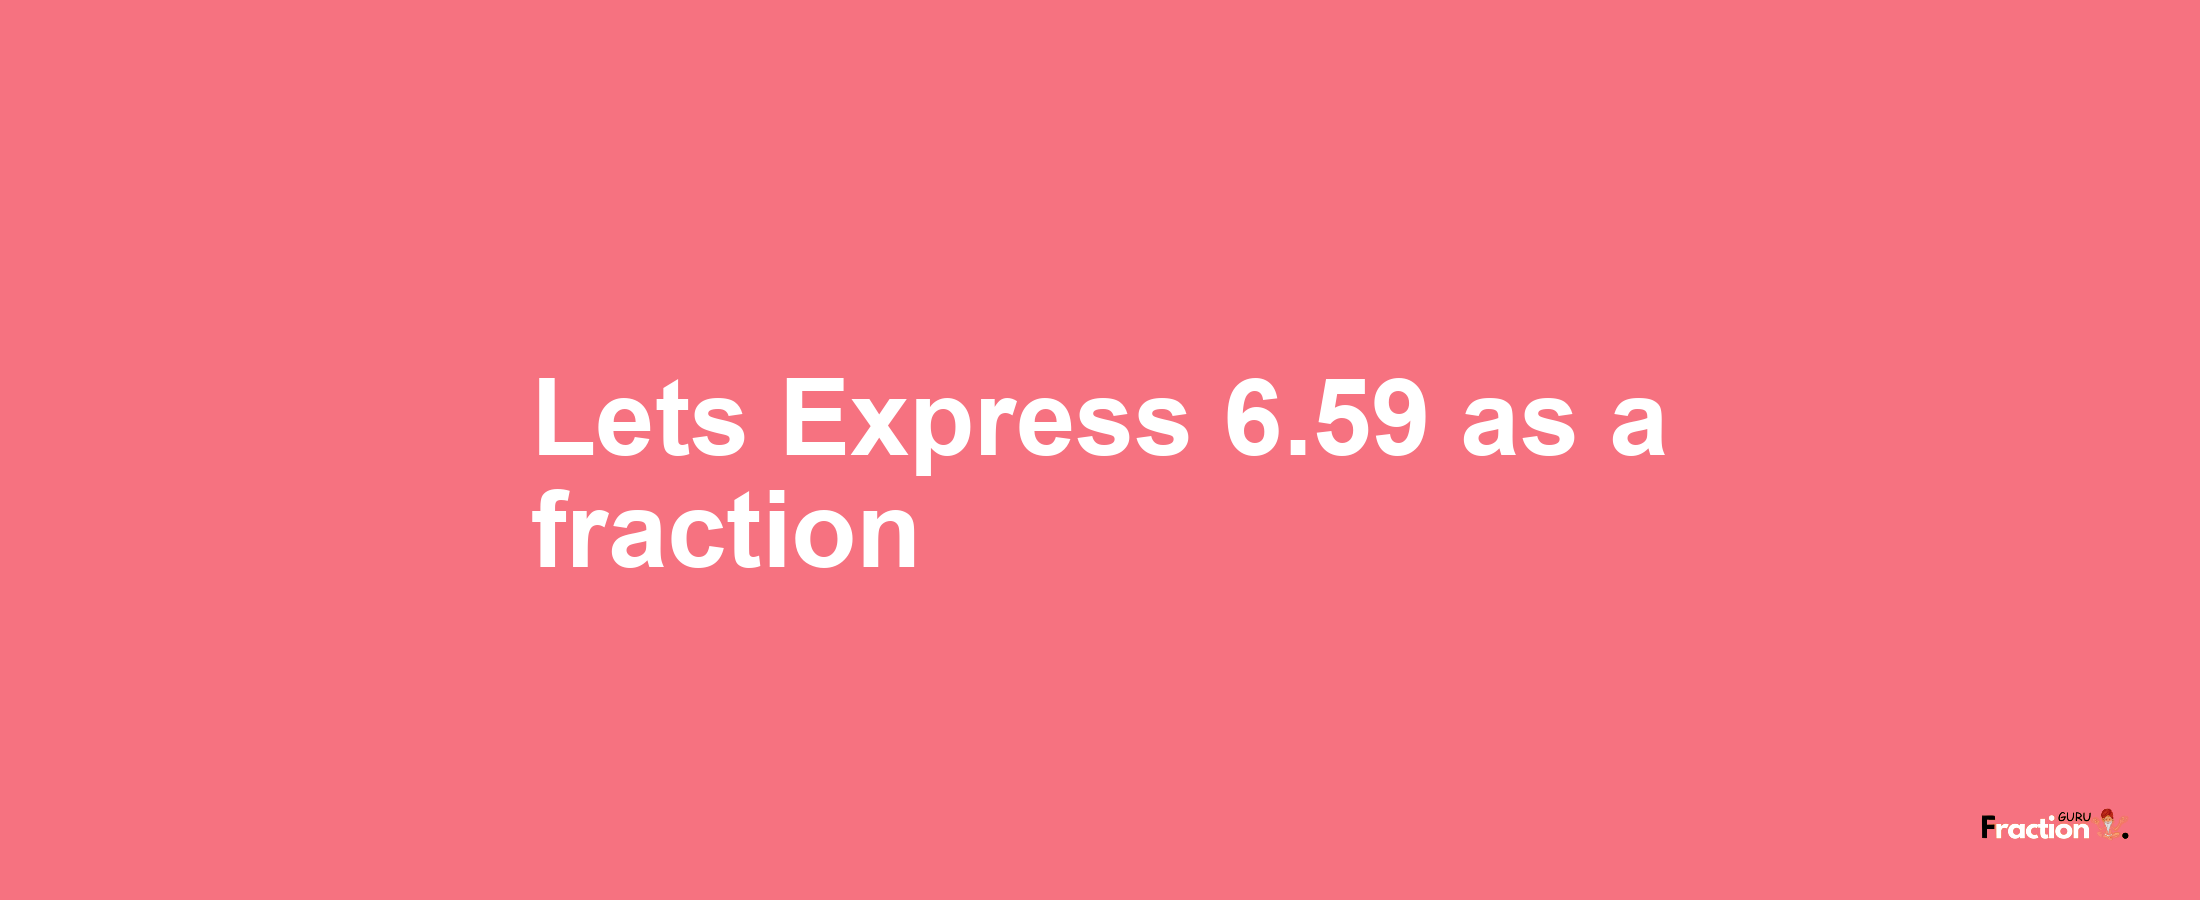 Lets Express 6.59 as afraction